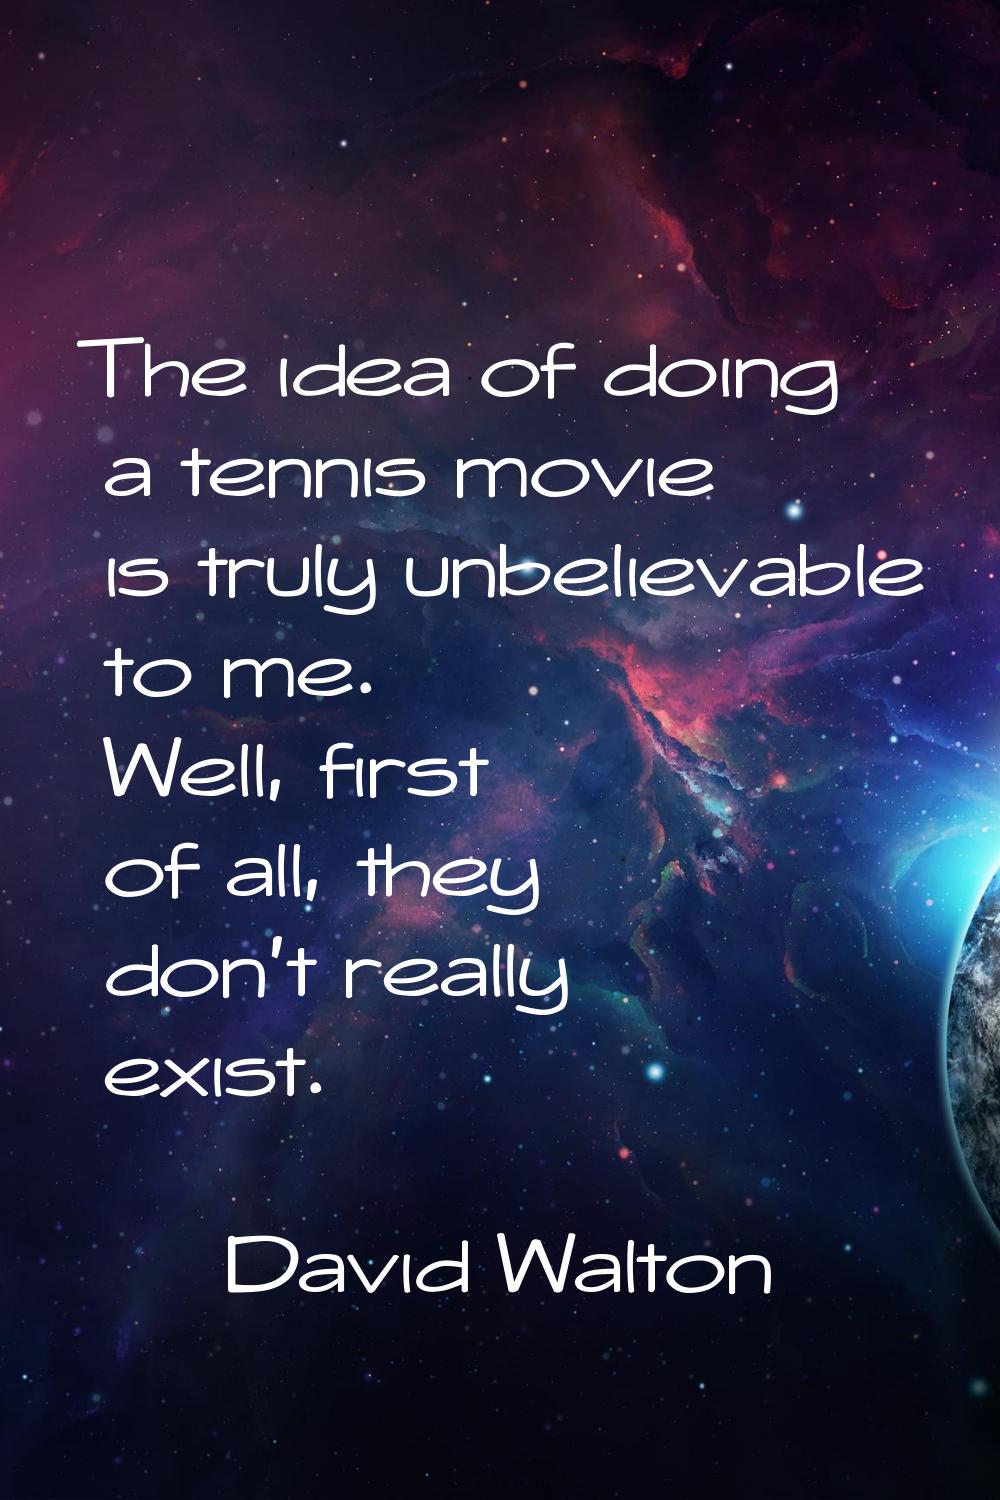 The idea of doing a tennis movie is truly unbelievable to me. Well, first of all, they don't really